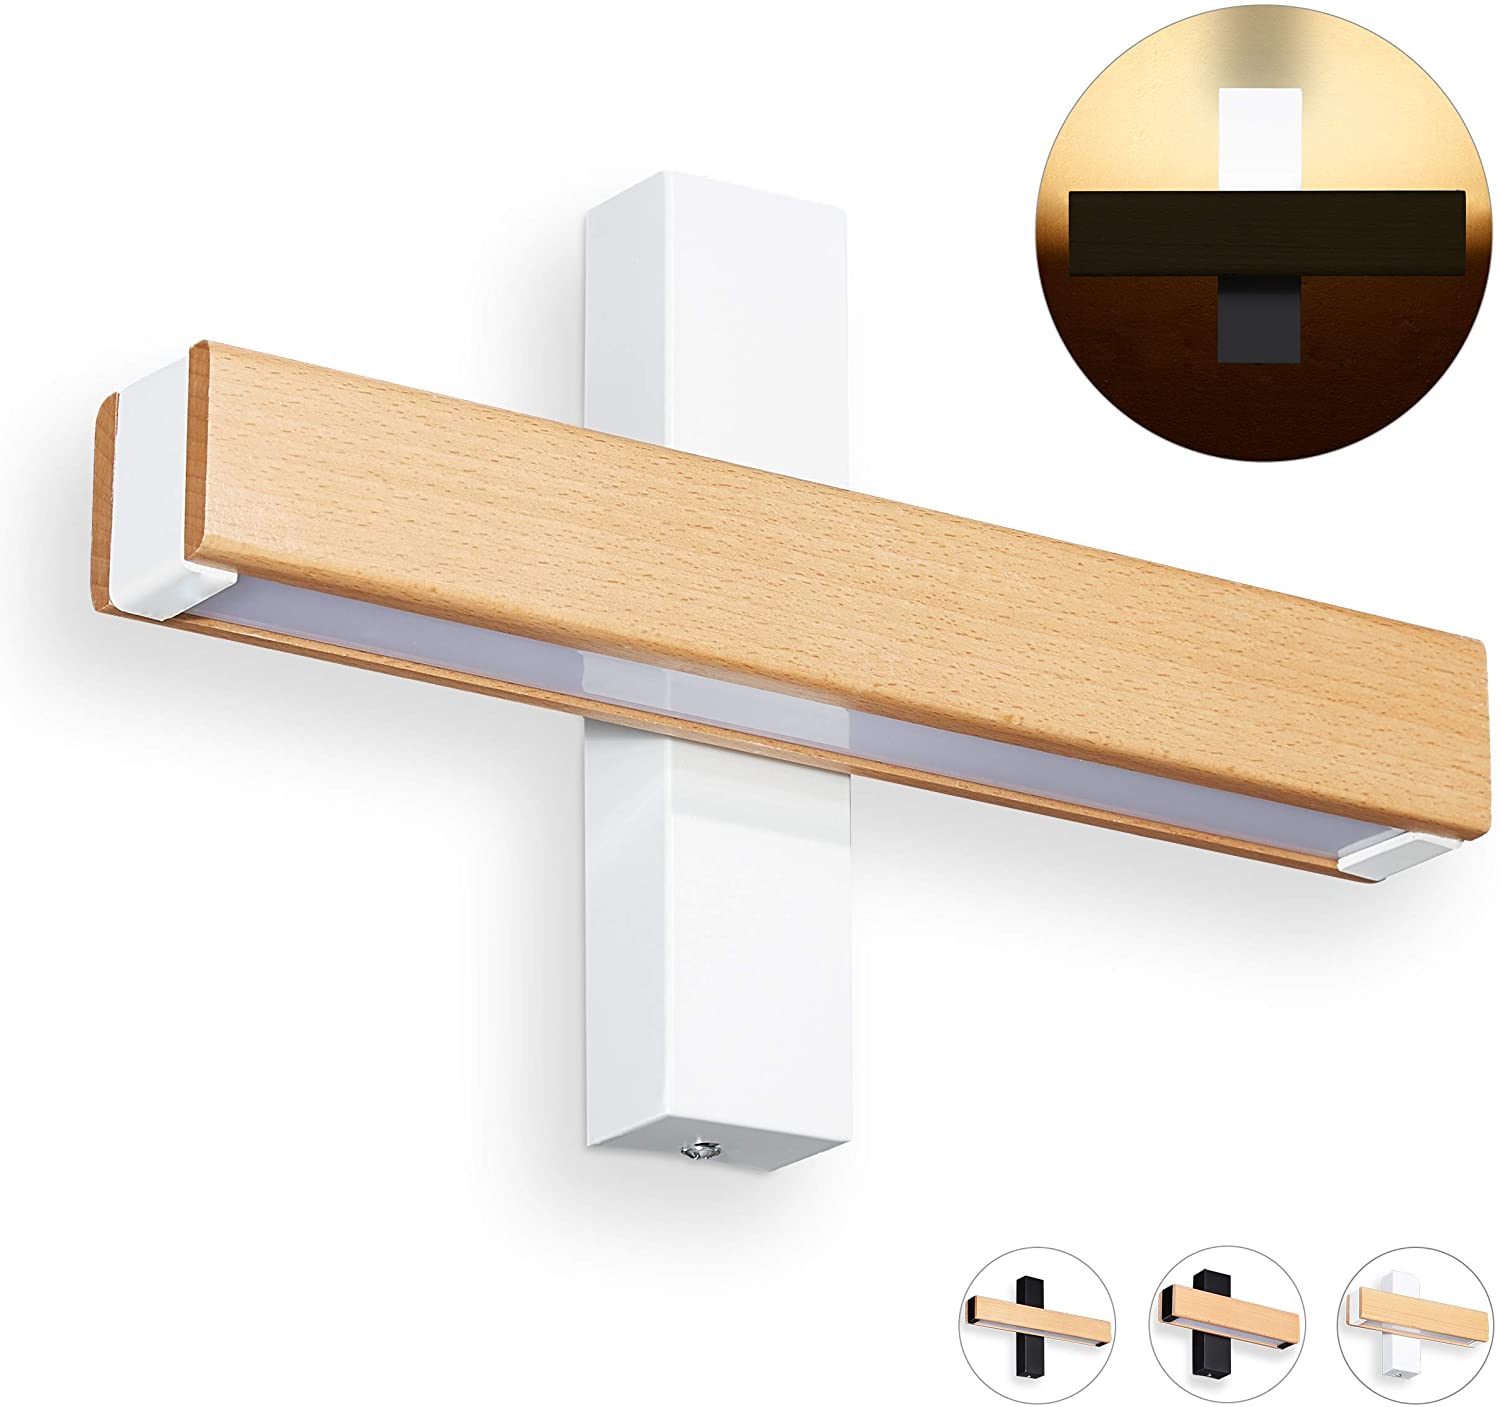 Relaxdays Wall Light Led Indirect Light Indoor Lighting For Hallway Stairs 